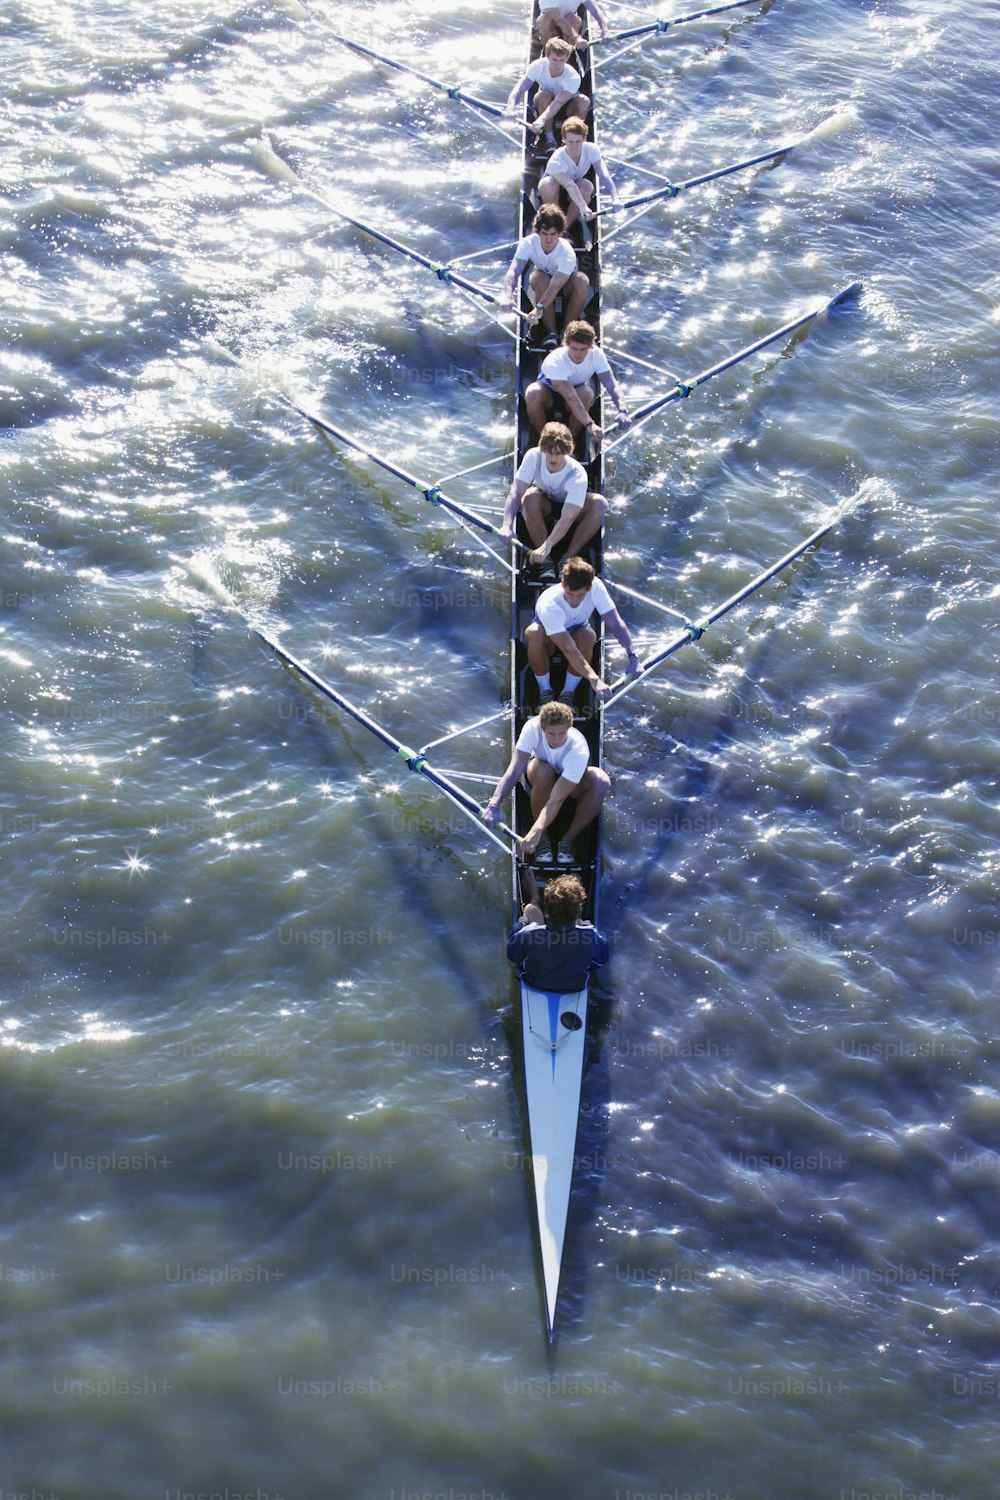 a group of people rowing a long boat in the water